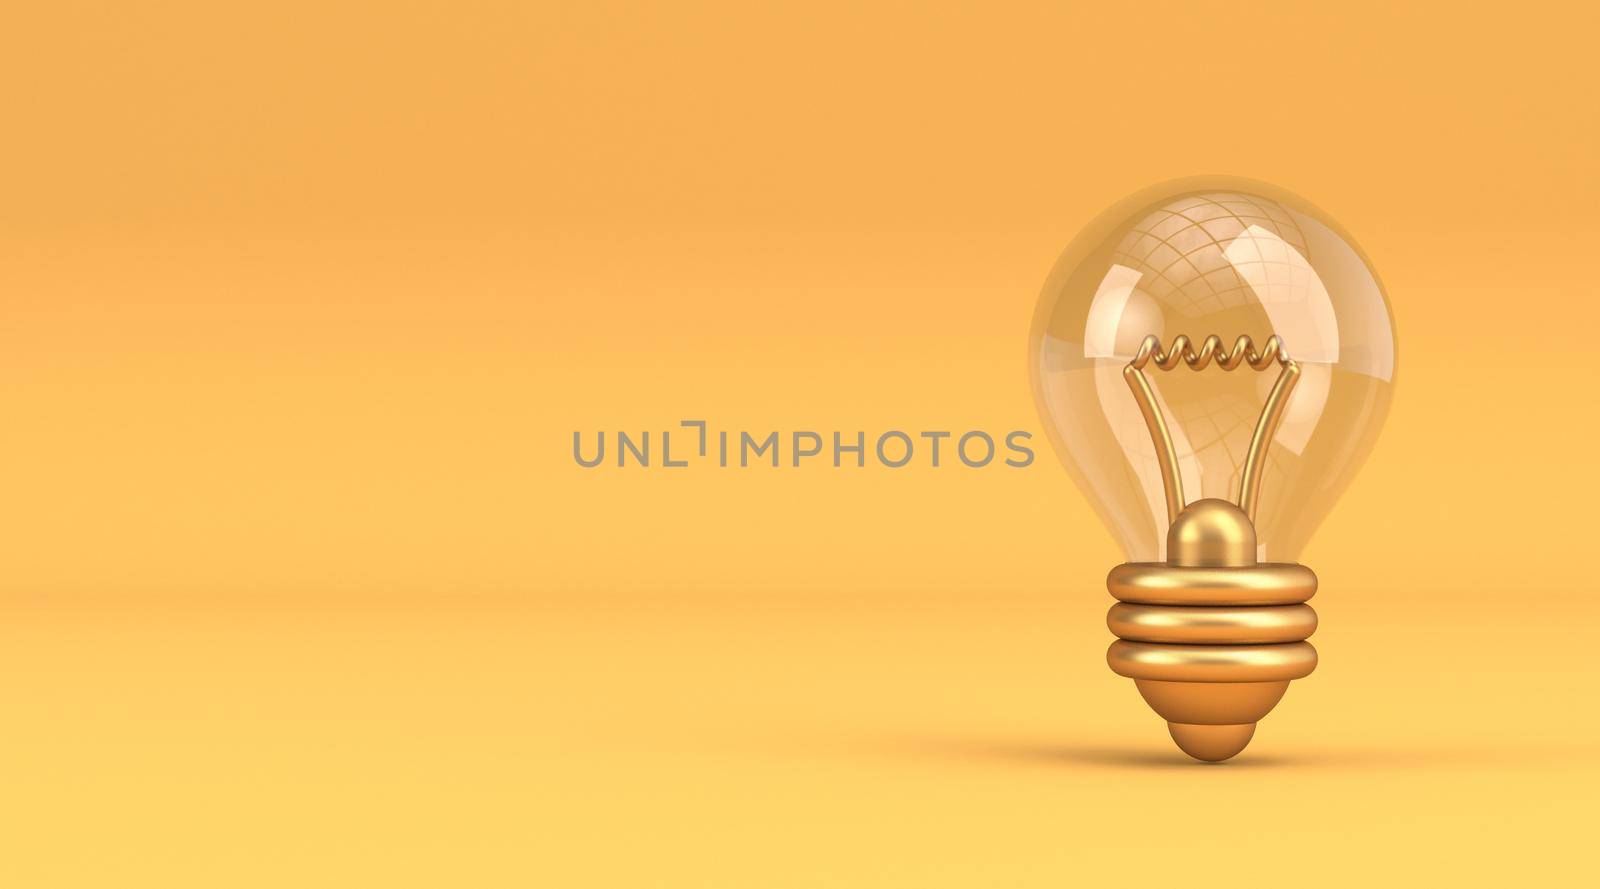 Yellow gold light bulb 3D rendering illustration isolated on yellow background